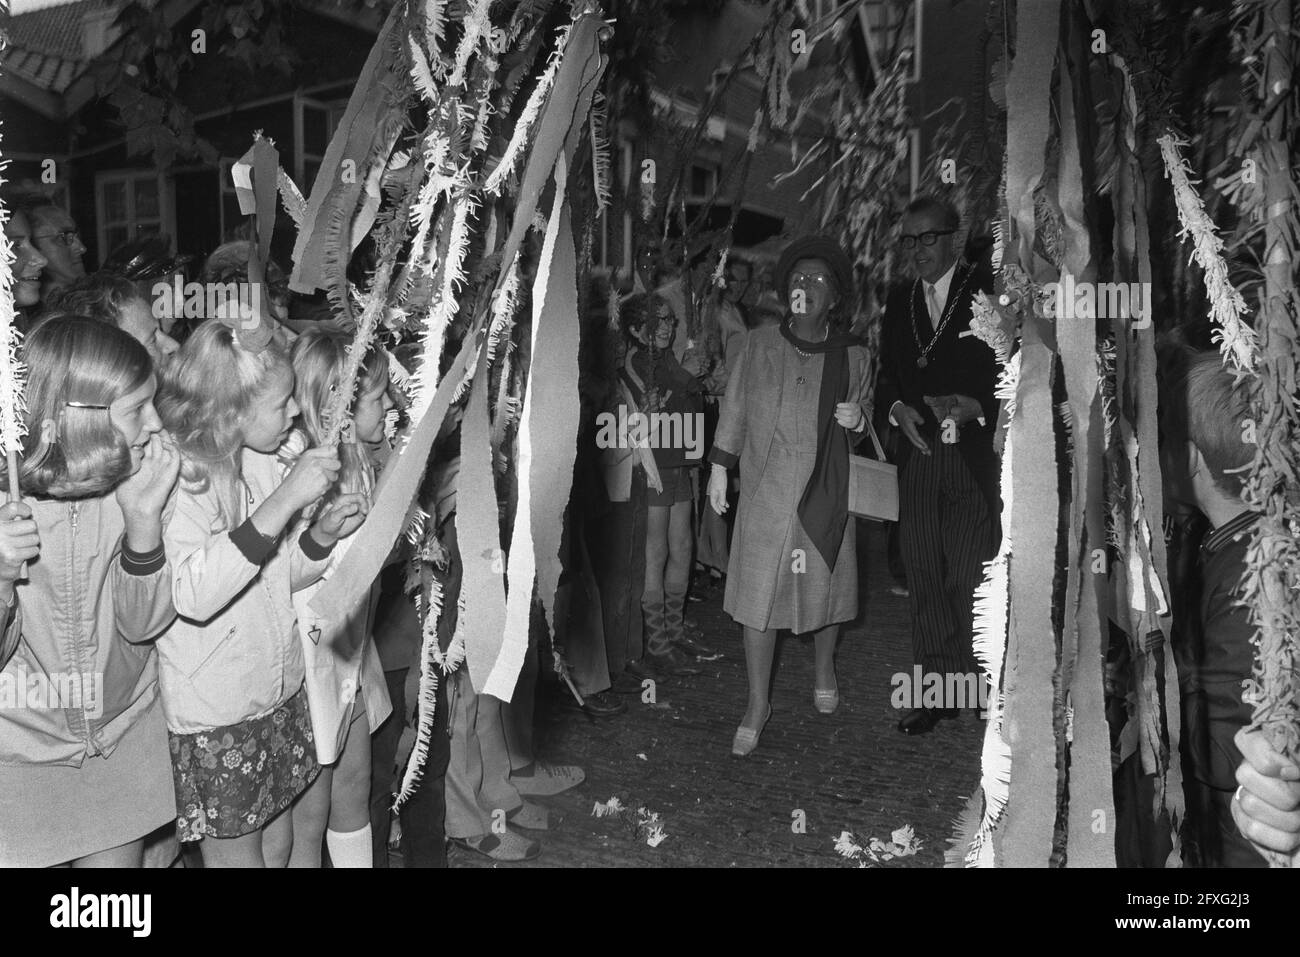 Queen Juliana visits municipalities Rhoon, Poortugaal and Maassluis ( South Holland ), Queen Juliana looks at achievements of children in Trefcentrum De Korn in, September 24, 1971, children, queens, The Netherlands, 20th century press agency photo, news to remember, documentary, historic photography 1945-1990, visual stories, human history of the Twentieth Century, capturing moments in time Stock Photo